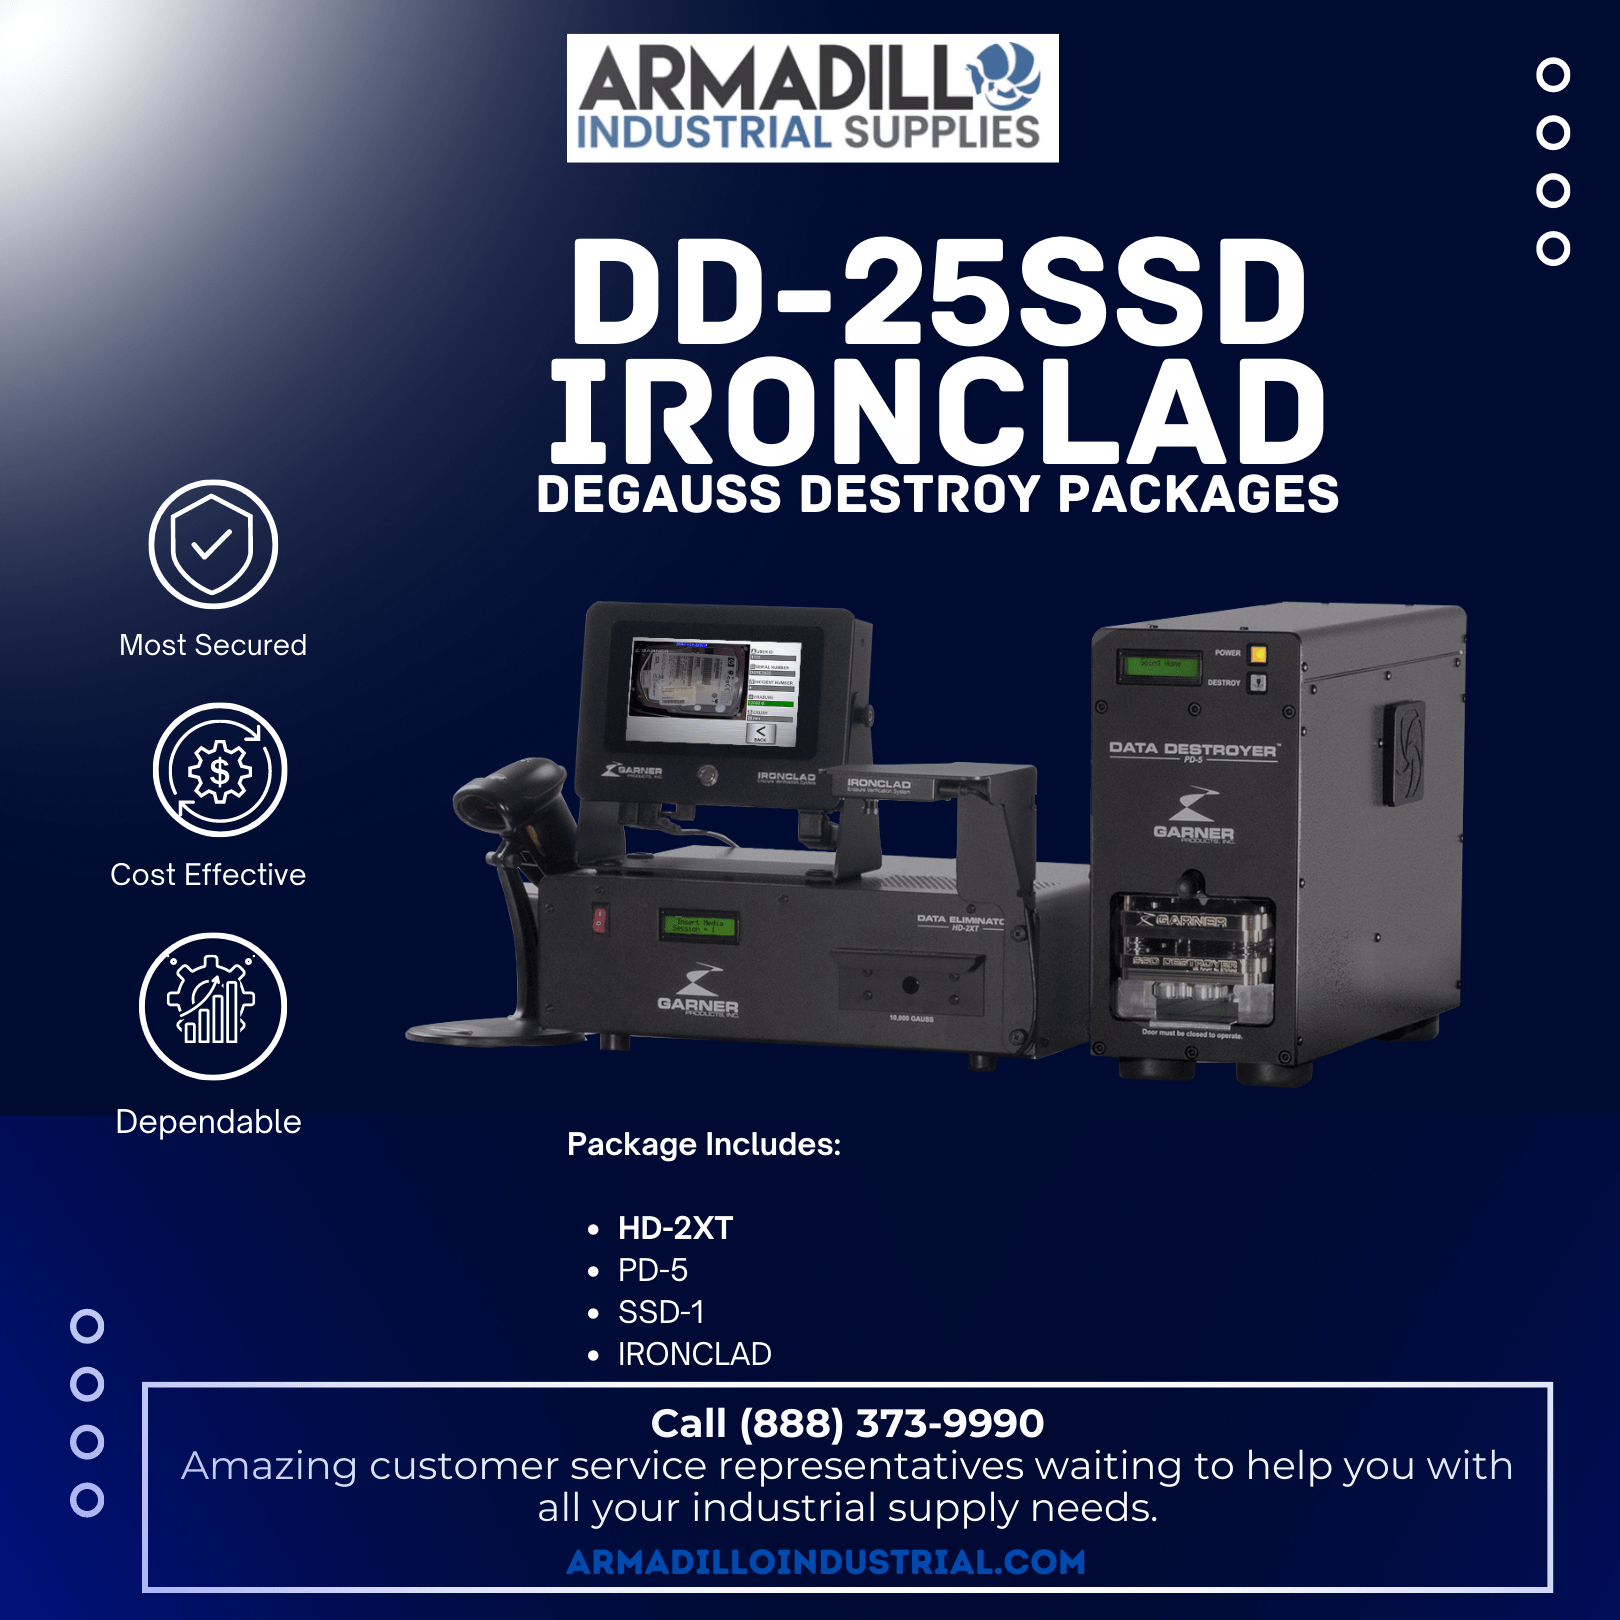 Garner Products Caliber DD-25SSD IRONCLAD Degauss & Destroy Package DD-25SSD IRONCLAD